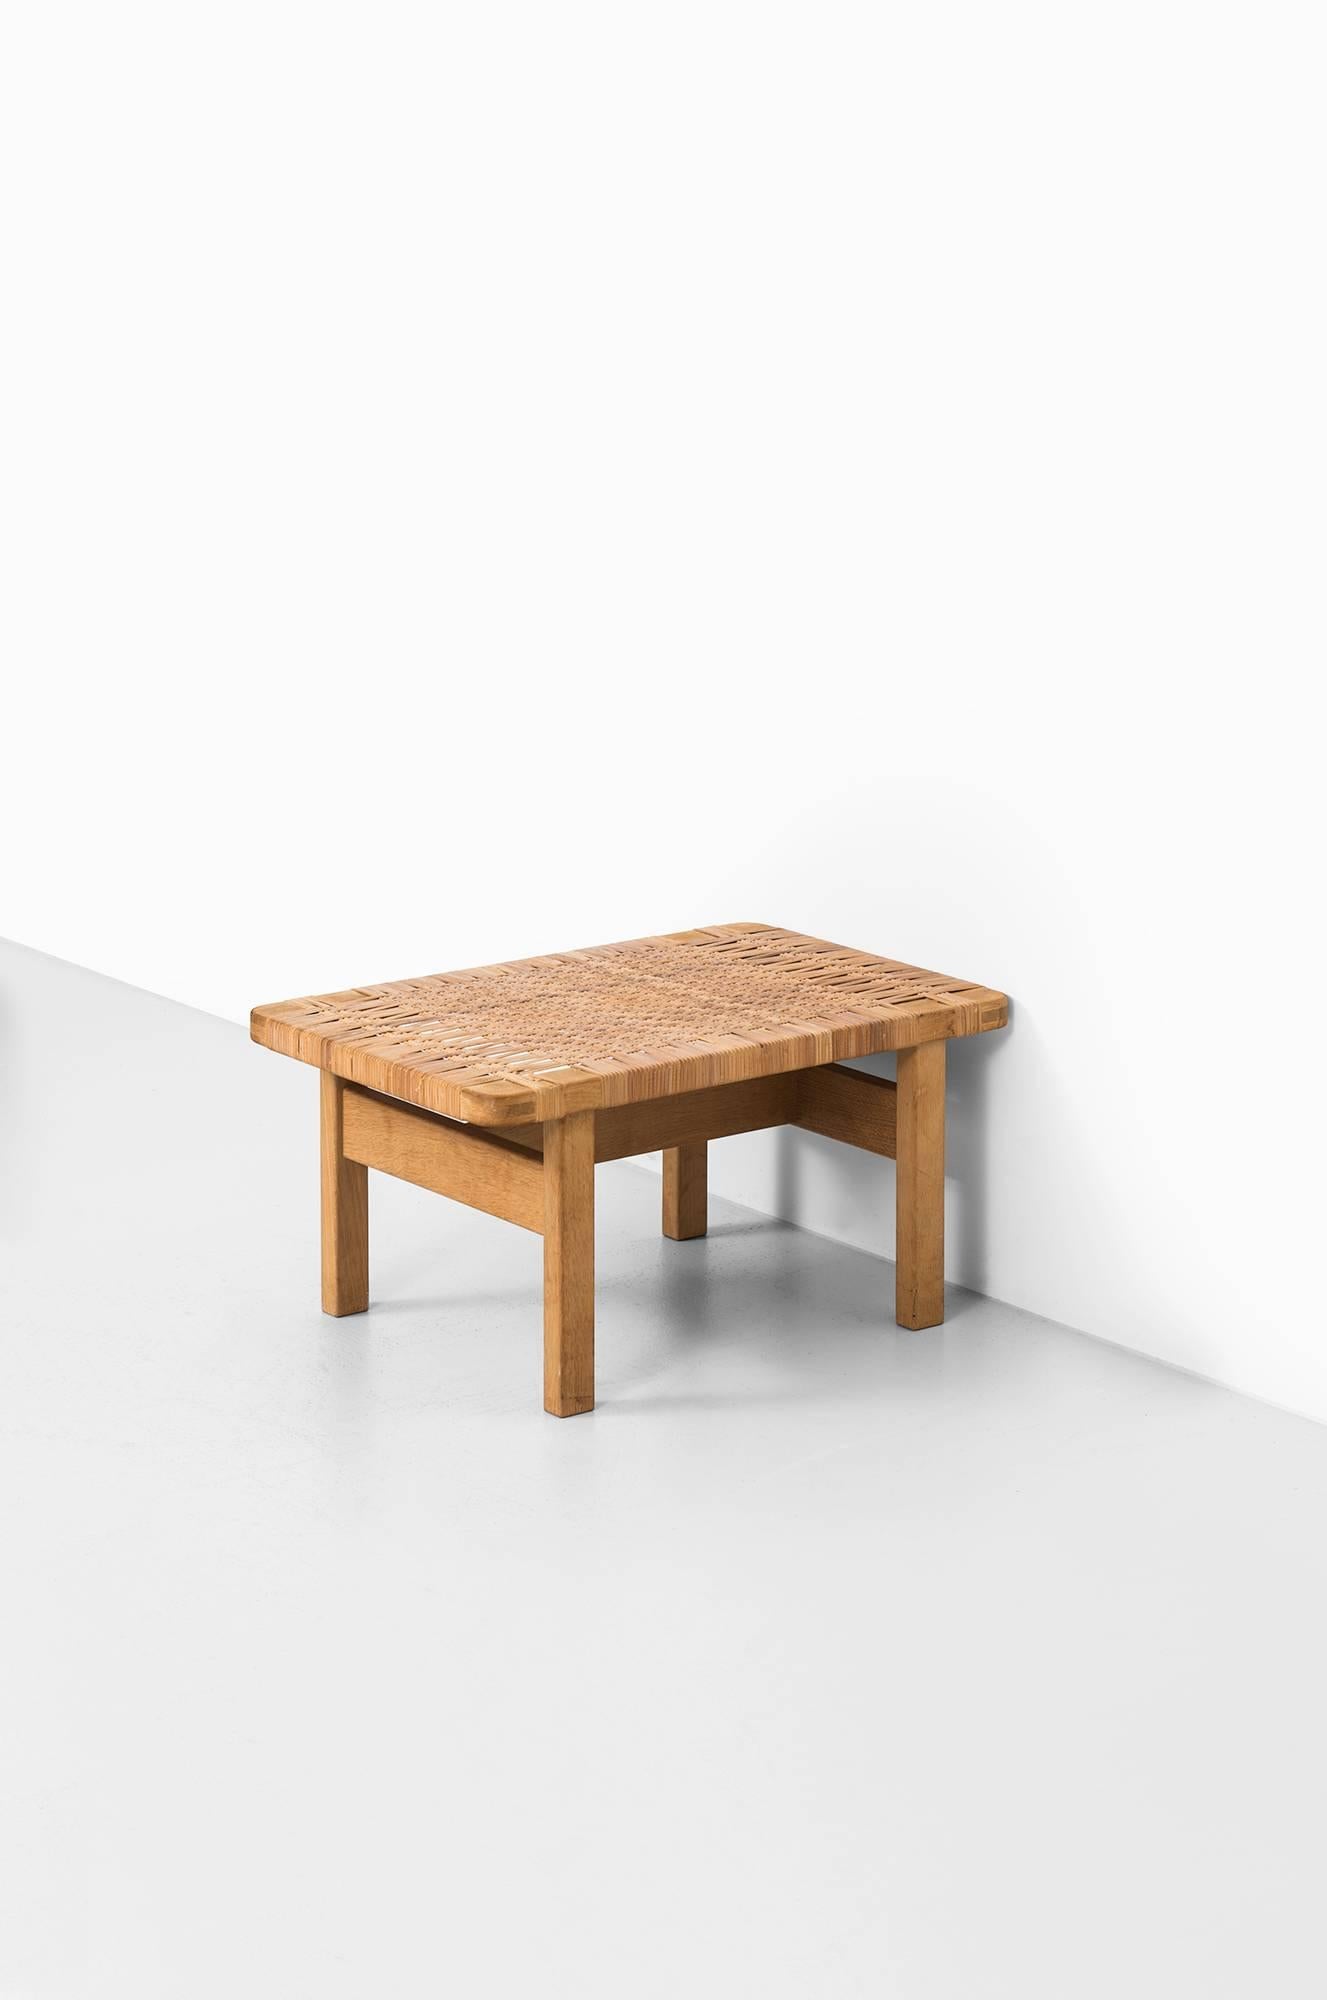 Rare side table in oak and cane designed by Børge Mogensen. Produced by Fredericia Stolefabrik in Denmark.